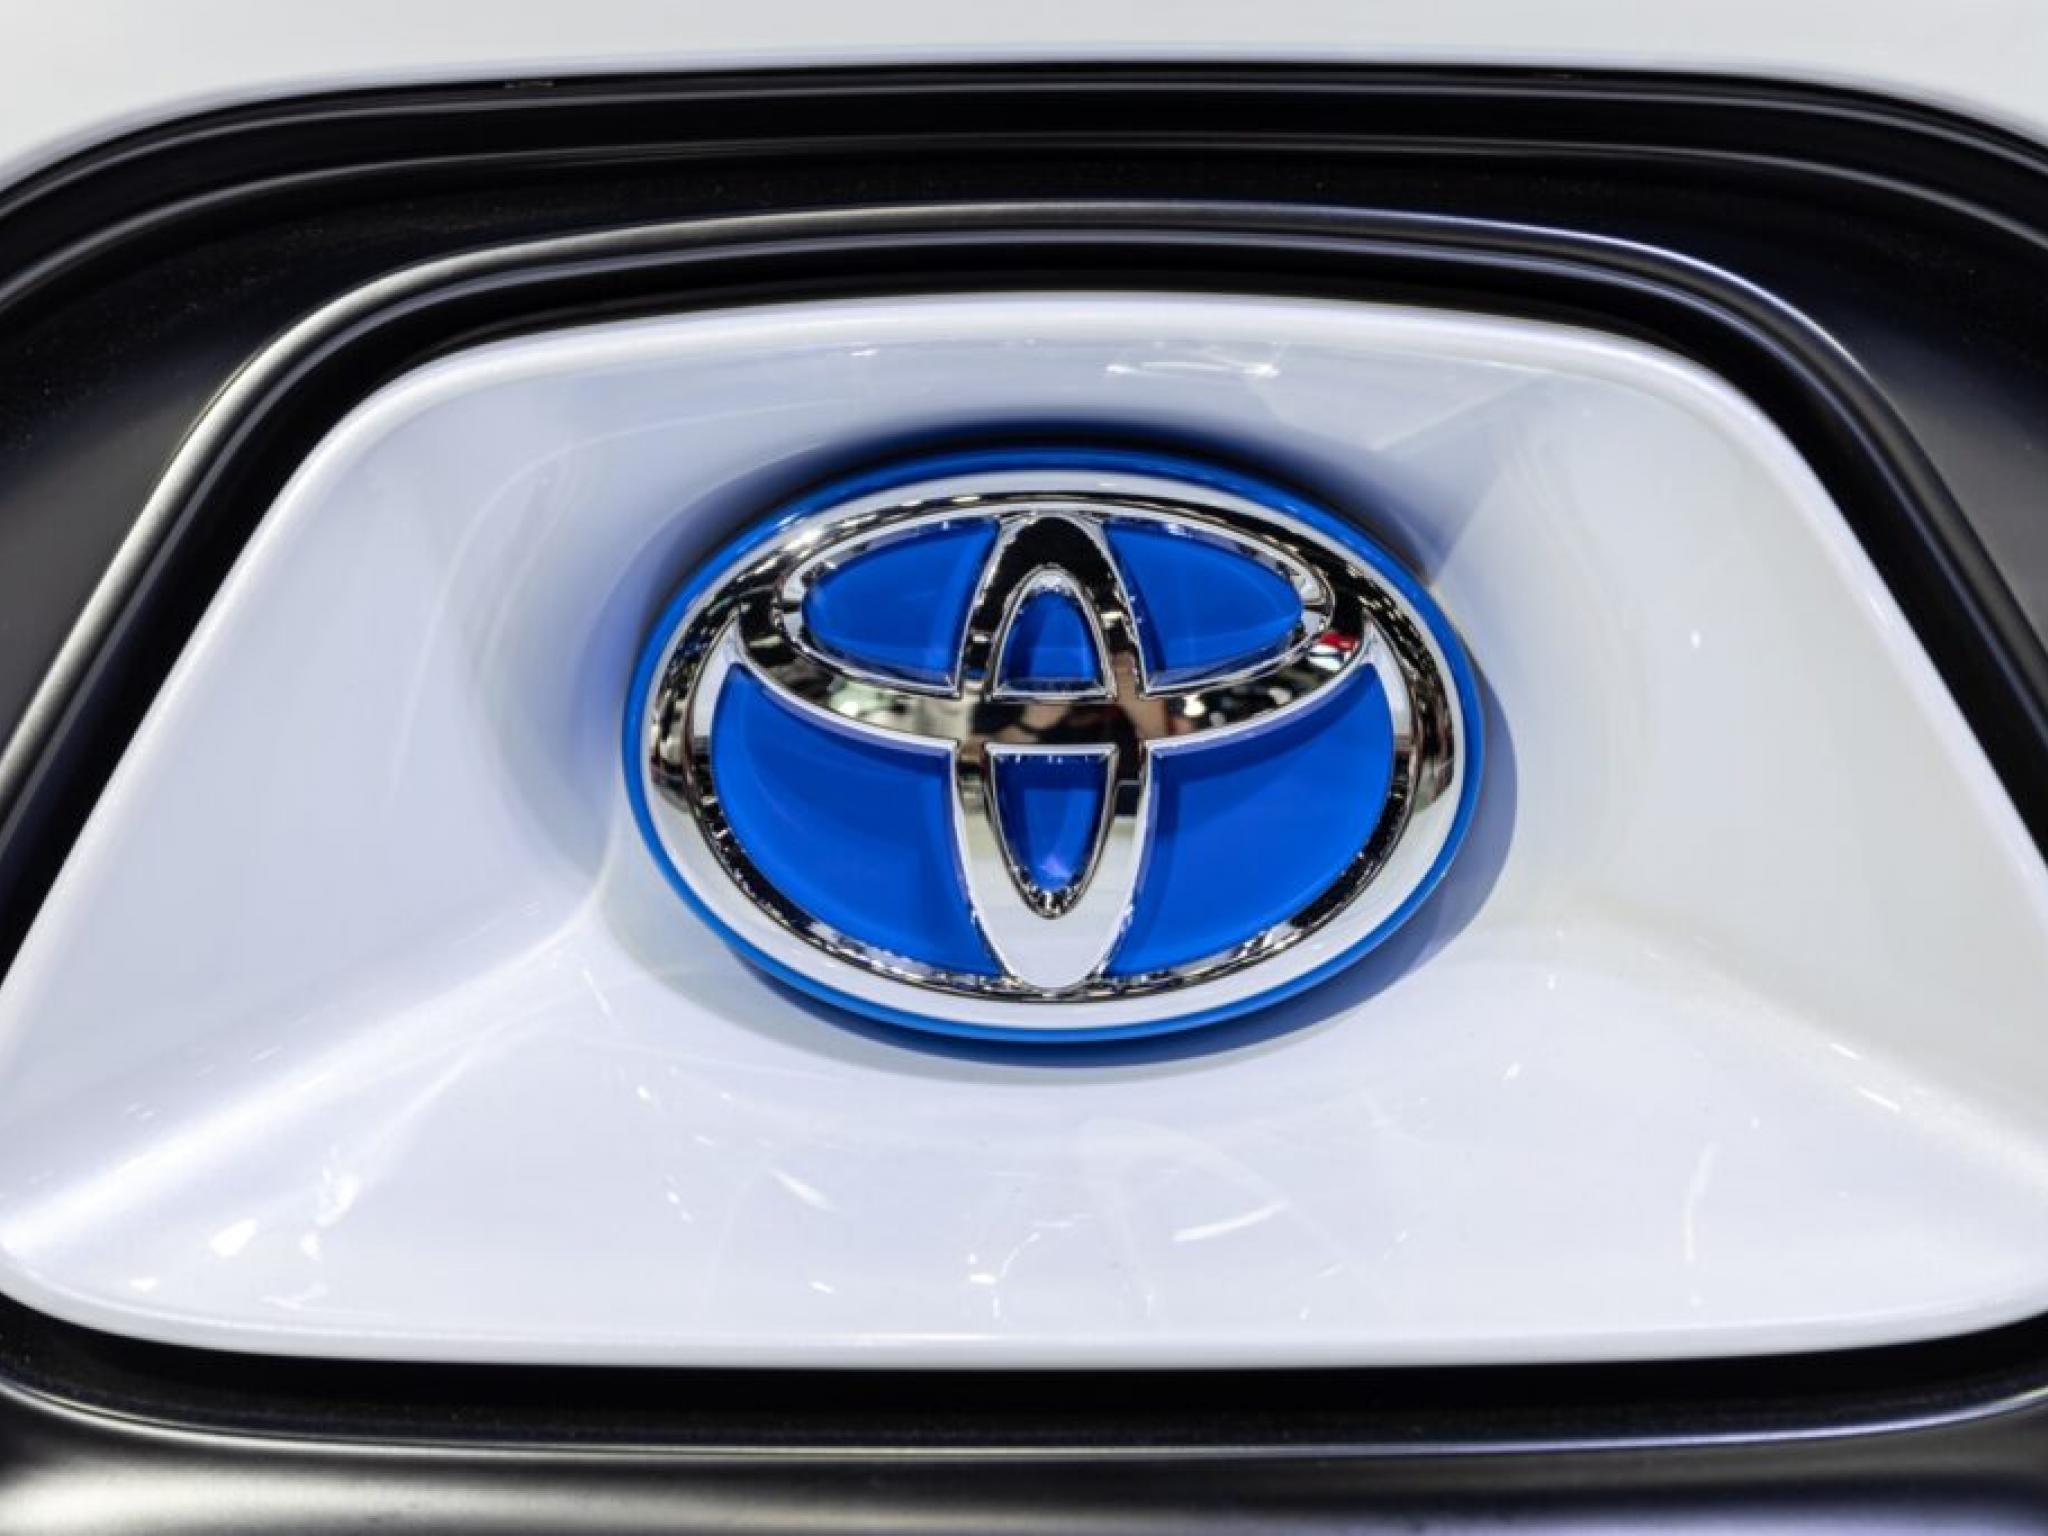  whats-going-on-with-toyota-motor-shares-today 